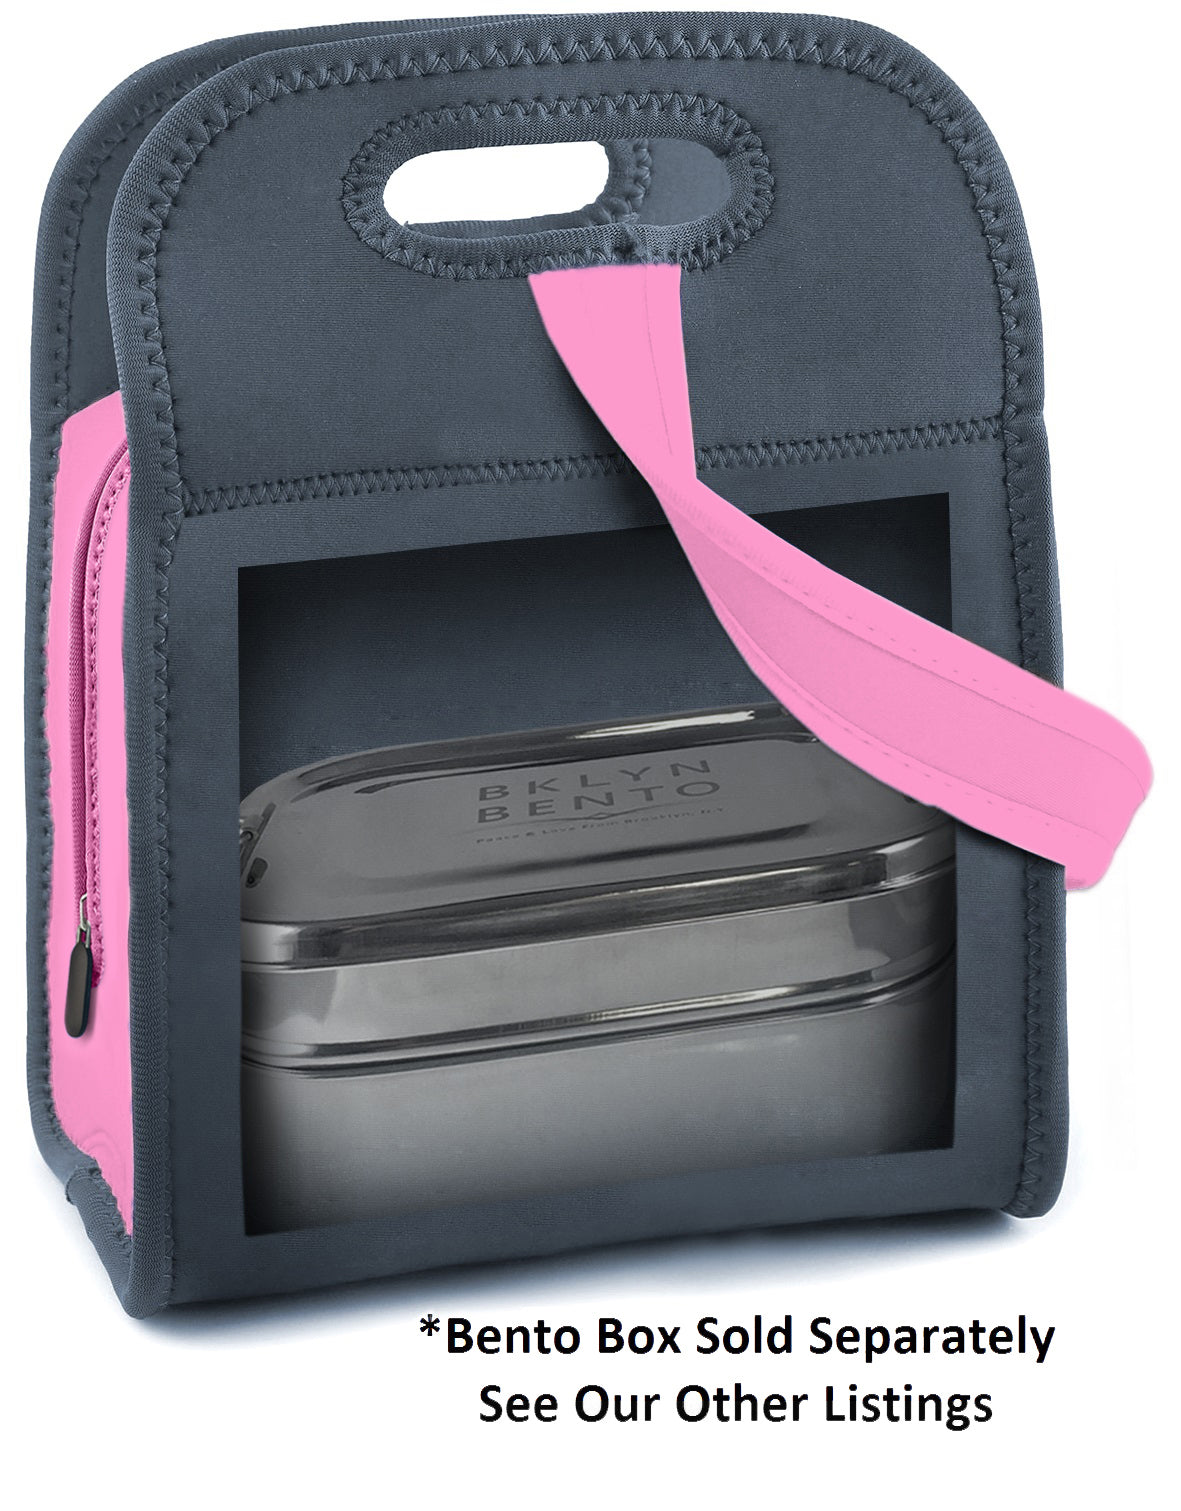 Bklyn Bento Neoprene Lunch Bag (Charcoal + Pink), Super Durable, Soft, Easy to Clean, Machine Washable